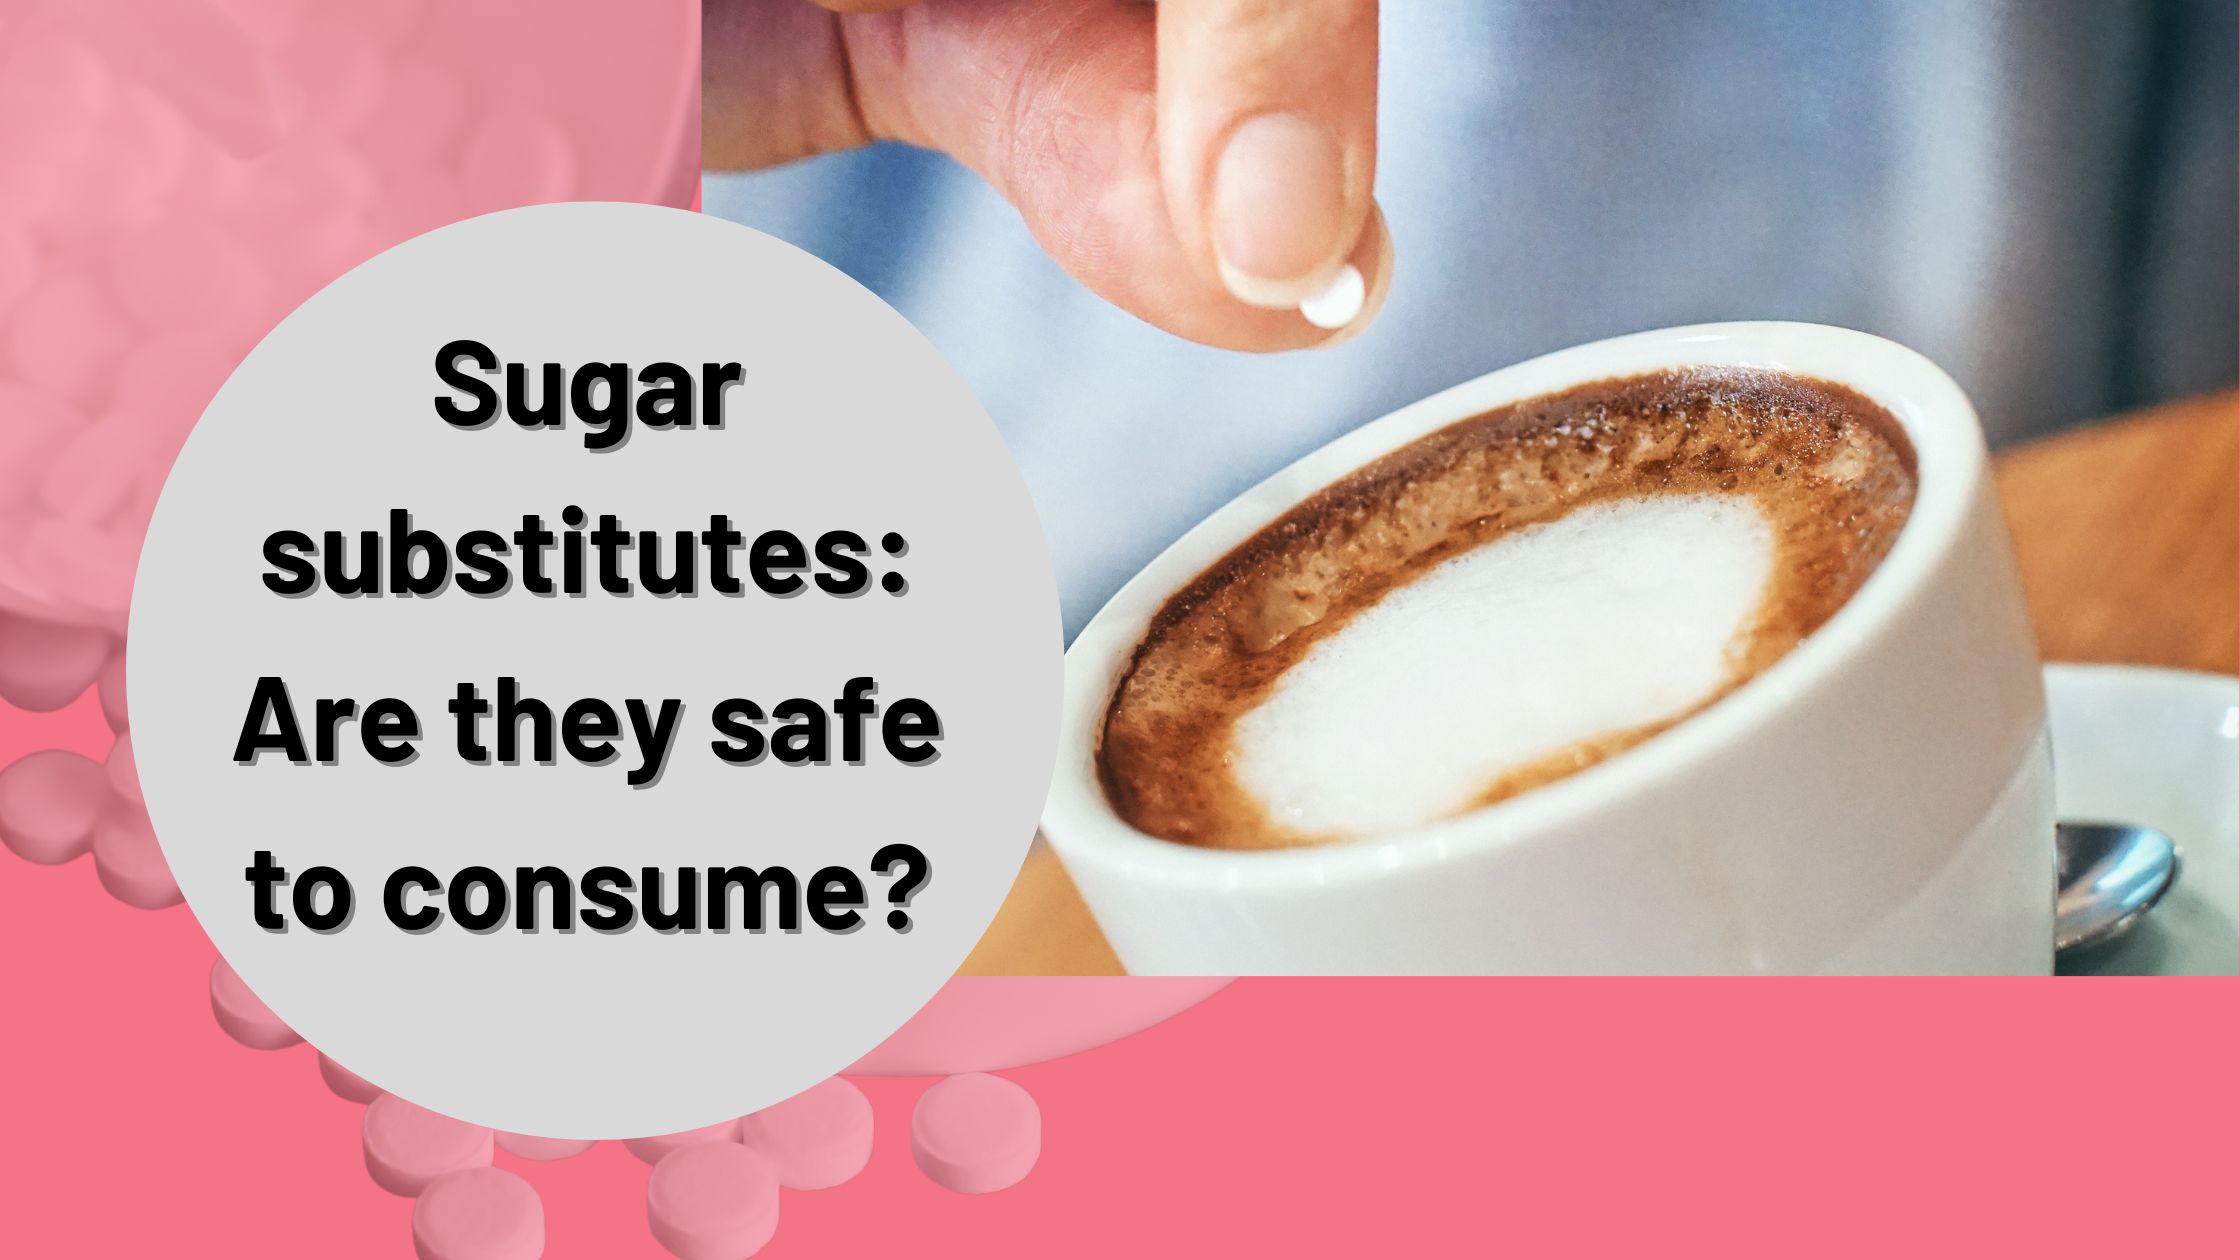 Sugar substitutes: Are they safe to consume?